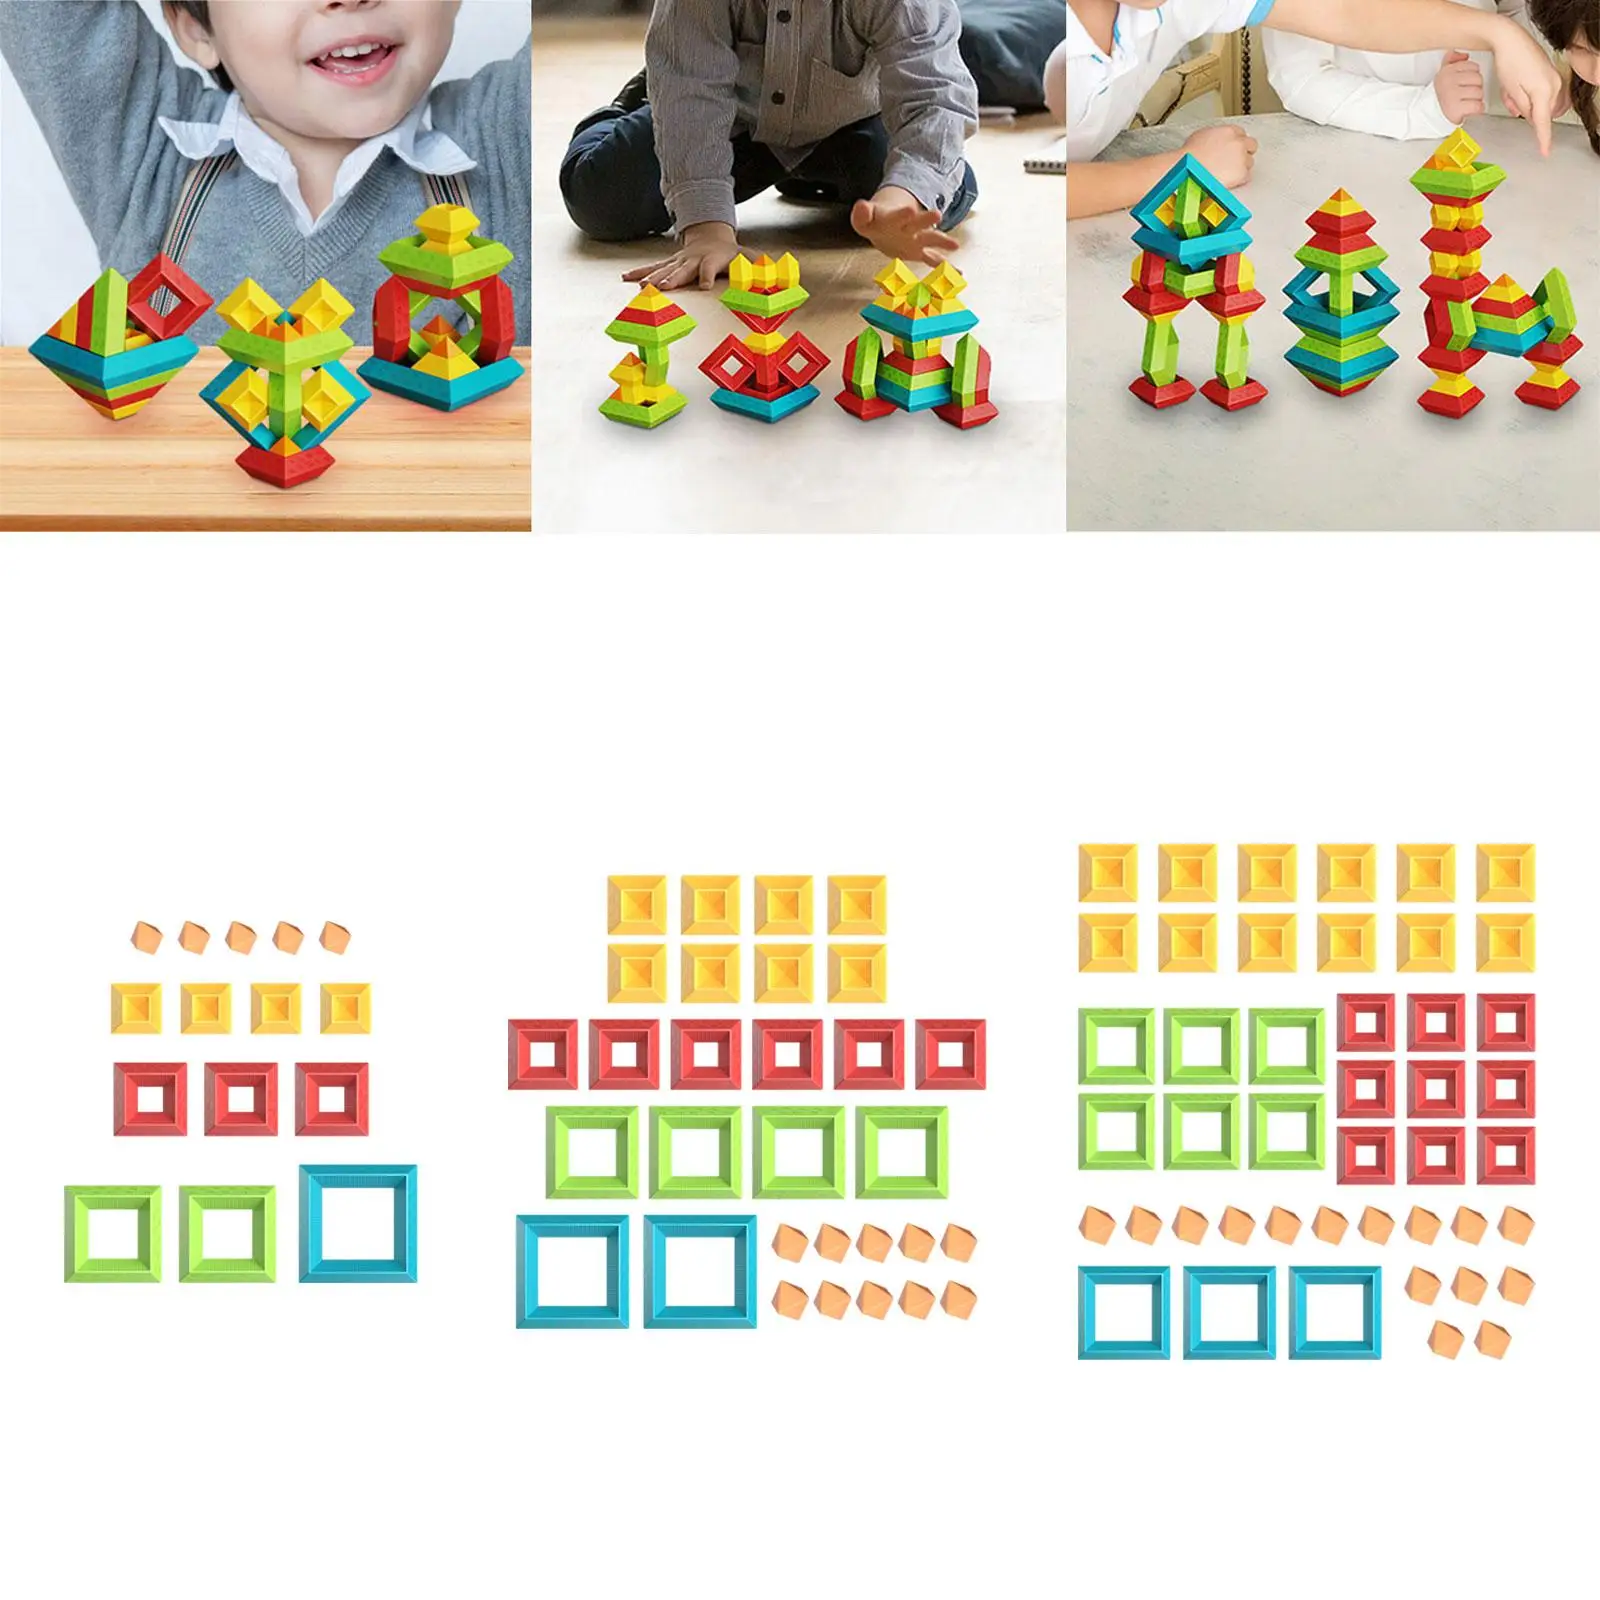 Baby Stacking Toys Creative Fine Motor Educational Toys Building Blocks for Boy Girls 1 2 3 4 5 Year Old Children Kids Toddlers